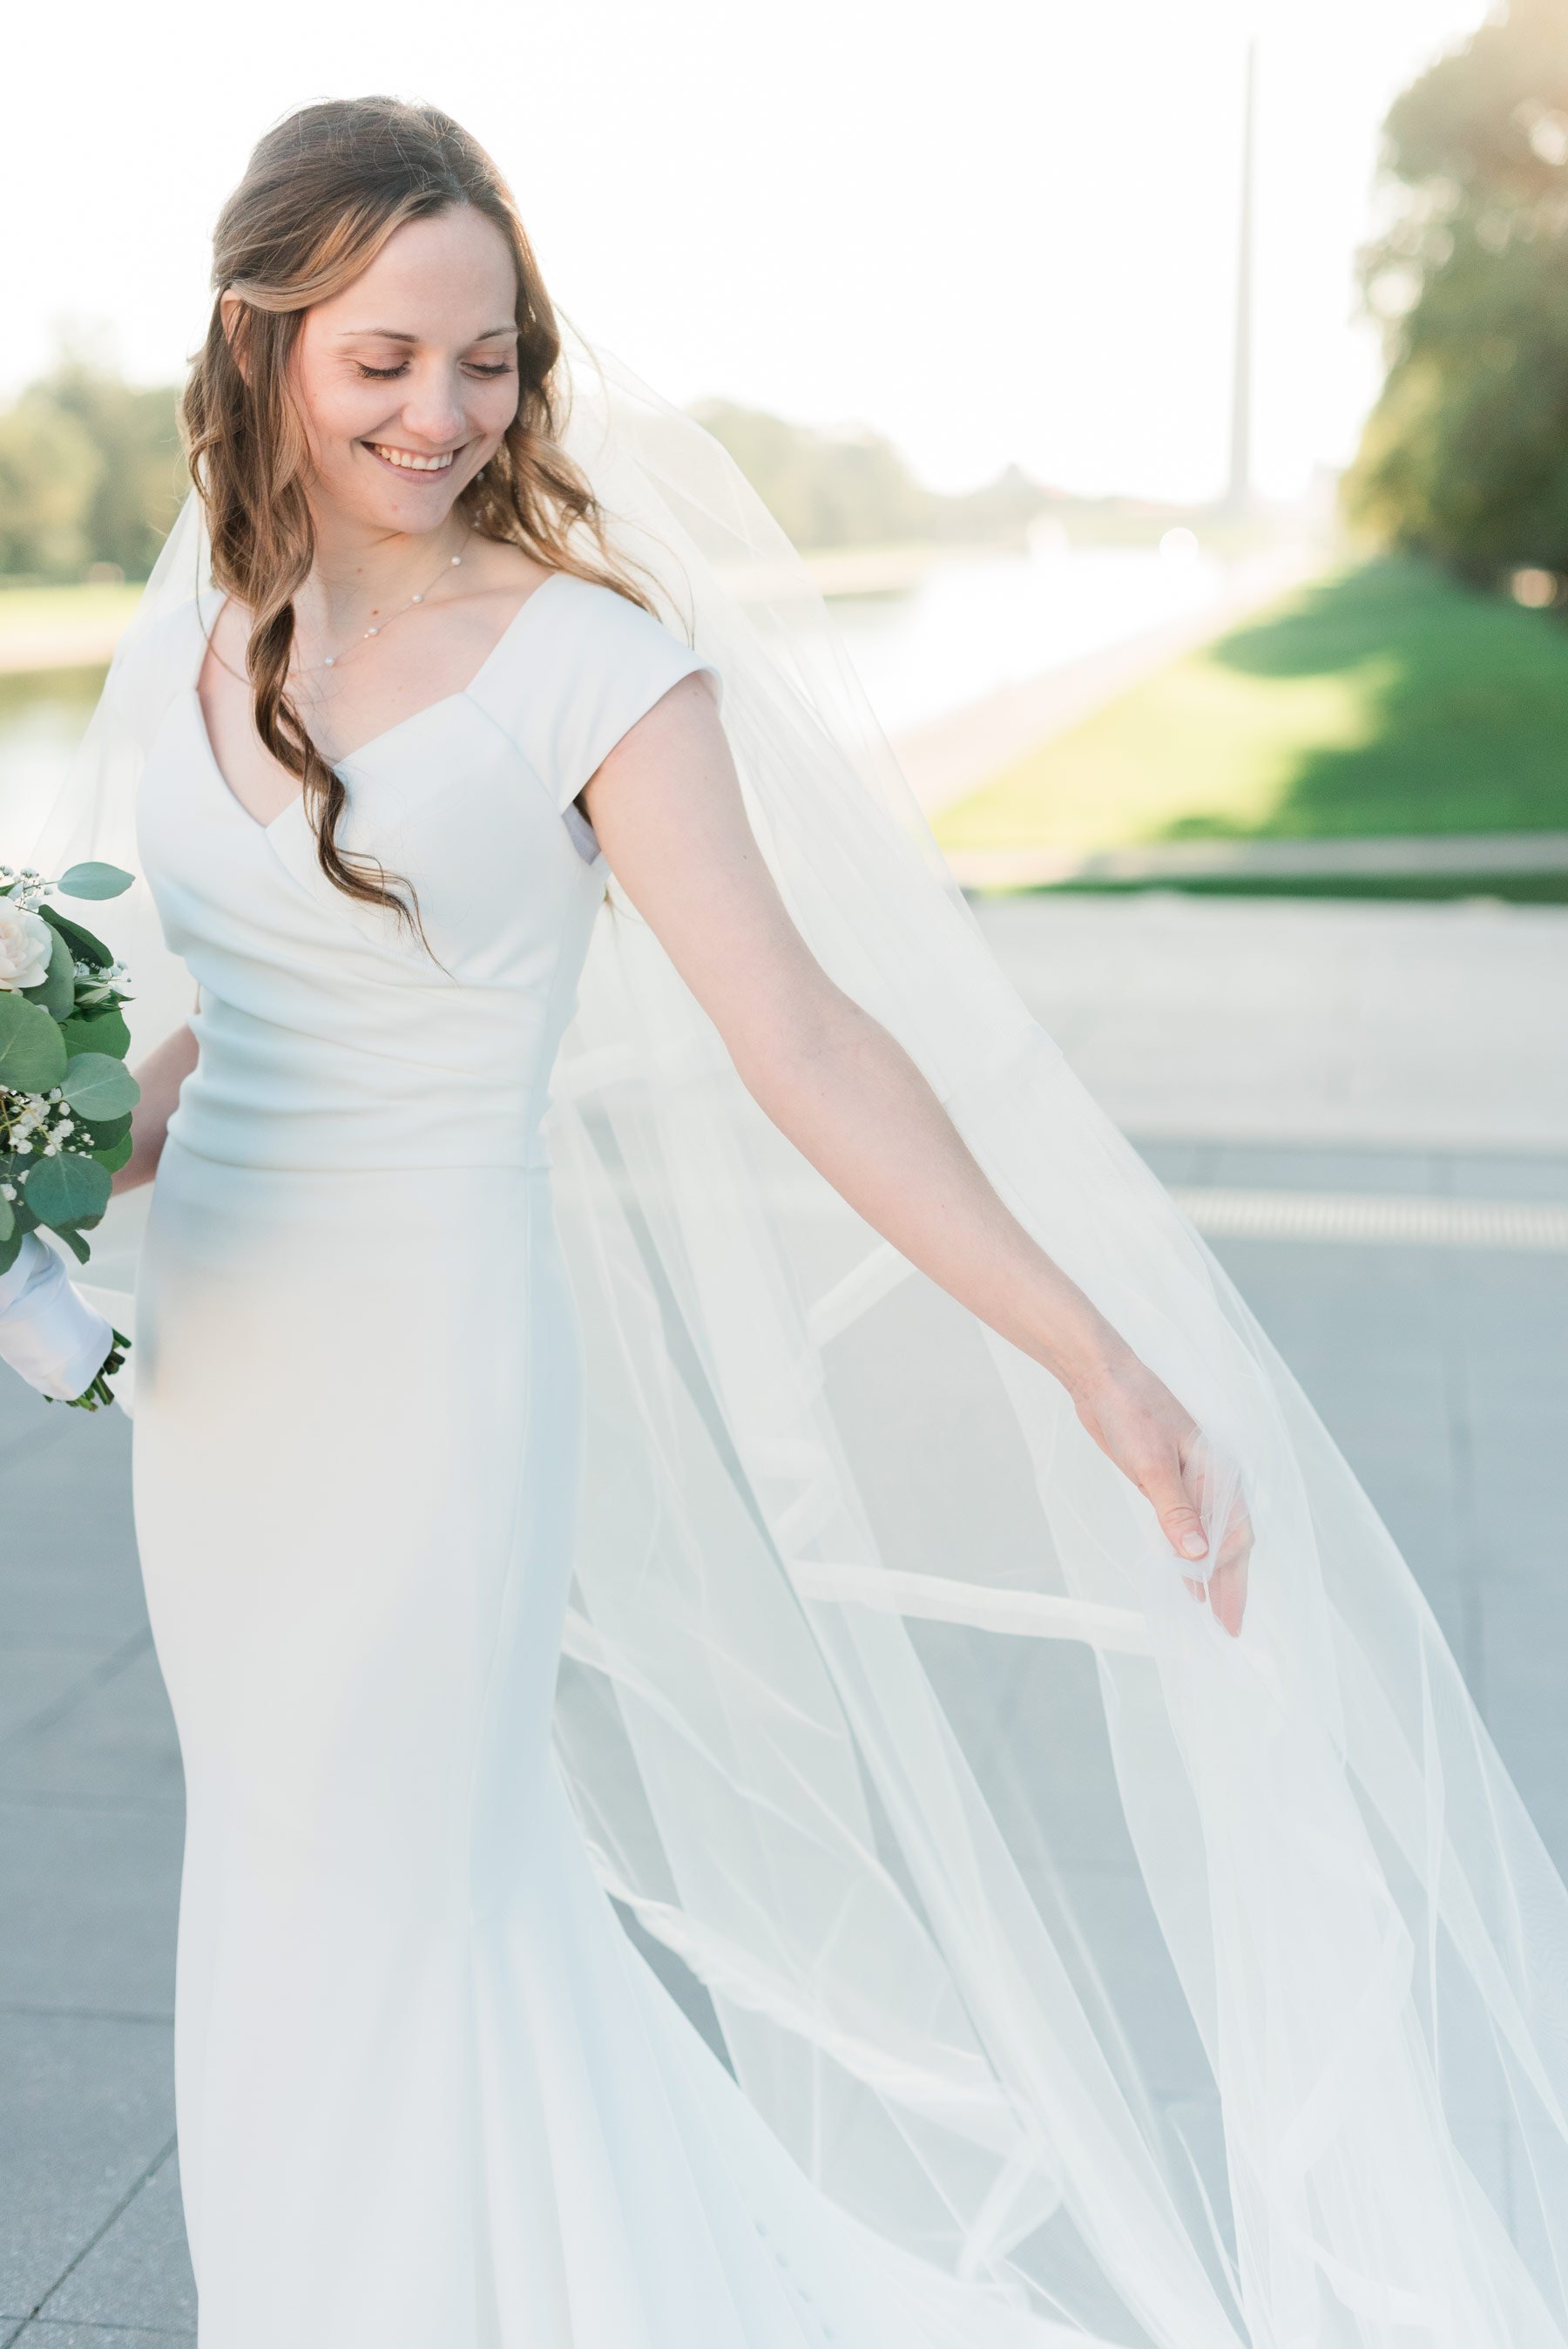    A beautiful veil shot with the Washington Monument featured in the background. #washingtondcphotography #washingtondctemple #washingtondcwedding #dcweddingphotographer #washingtondctemplewedding #eastcoastweddingphotographer #sunsetbridals #modest